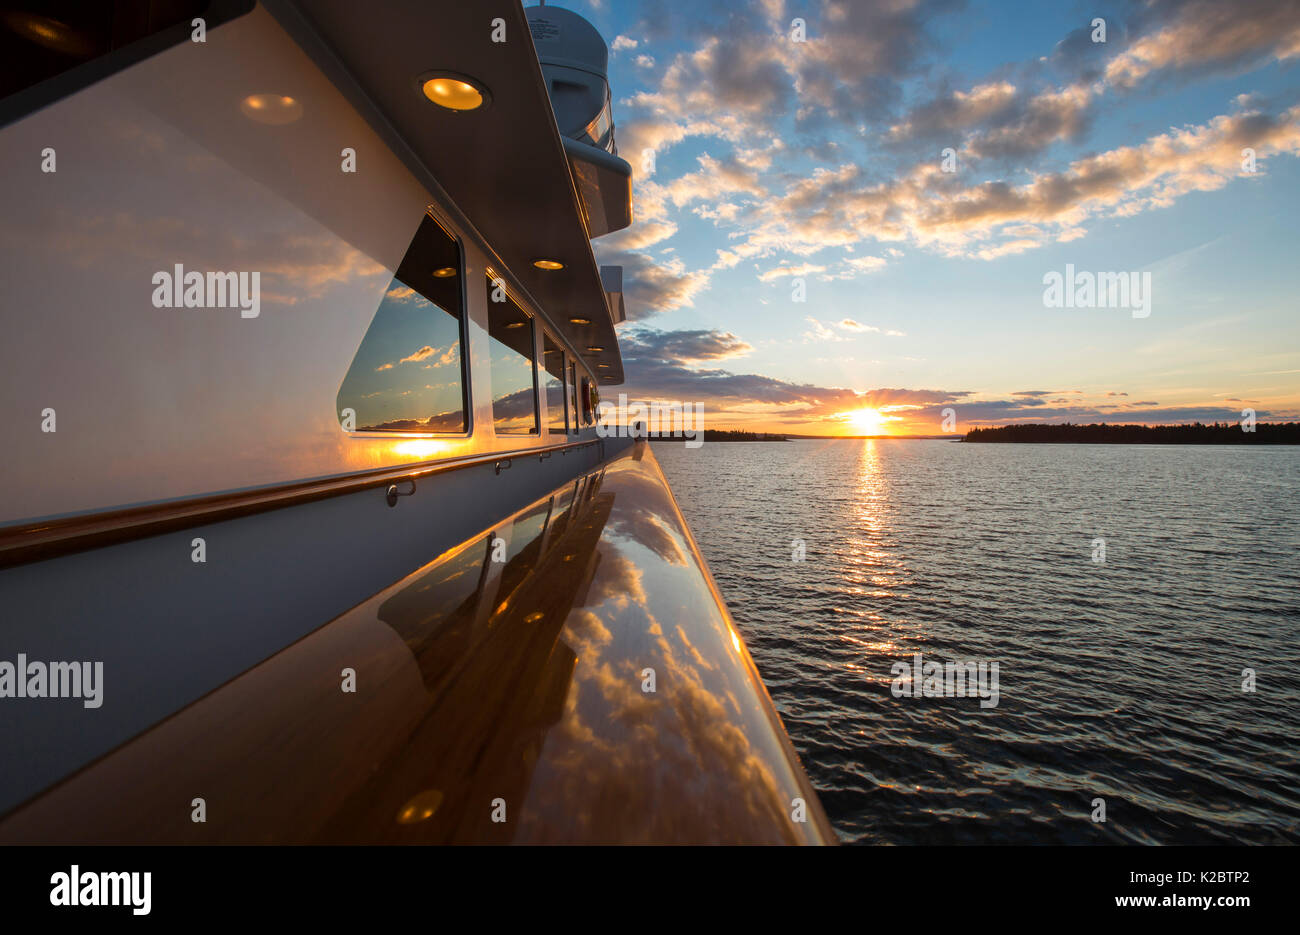 Sunset seen from the yacht Lady J near Butter Island, Maine, USA, August 2012. Stock Photo